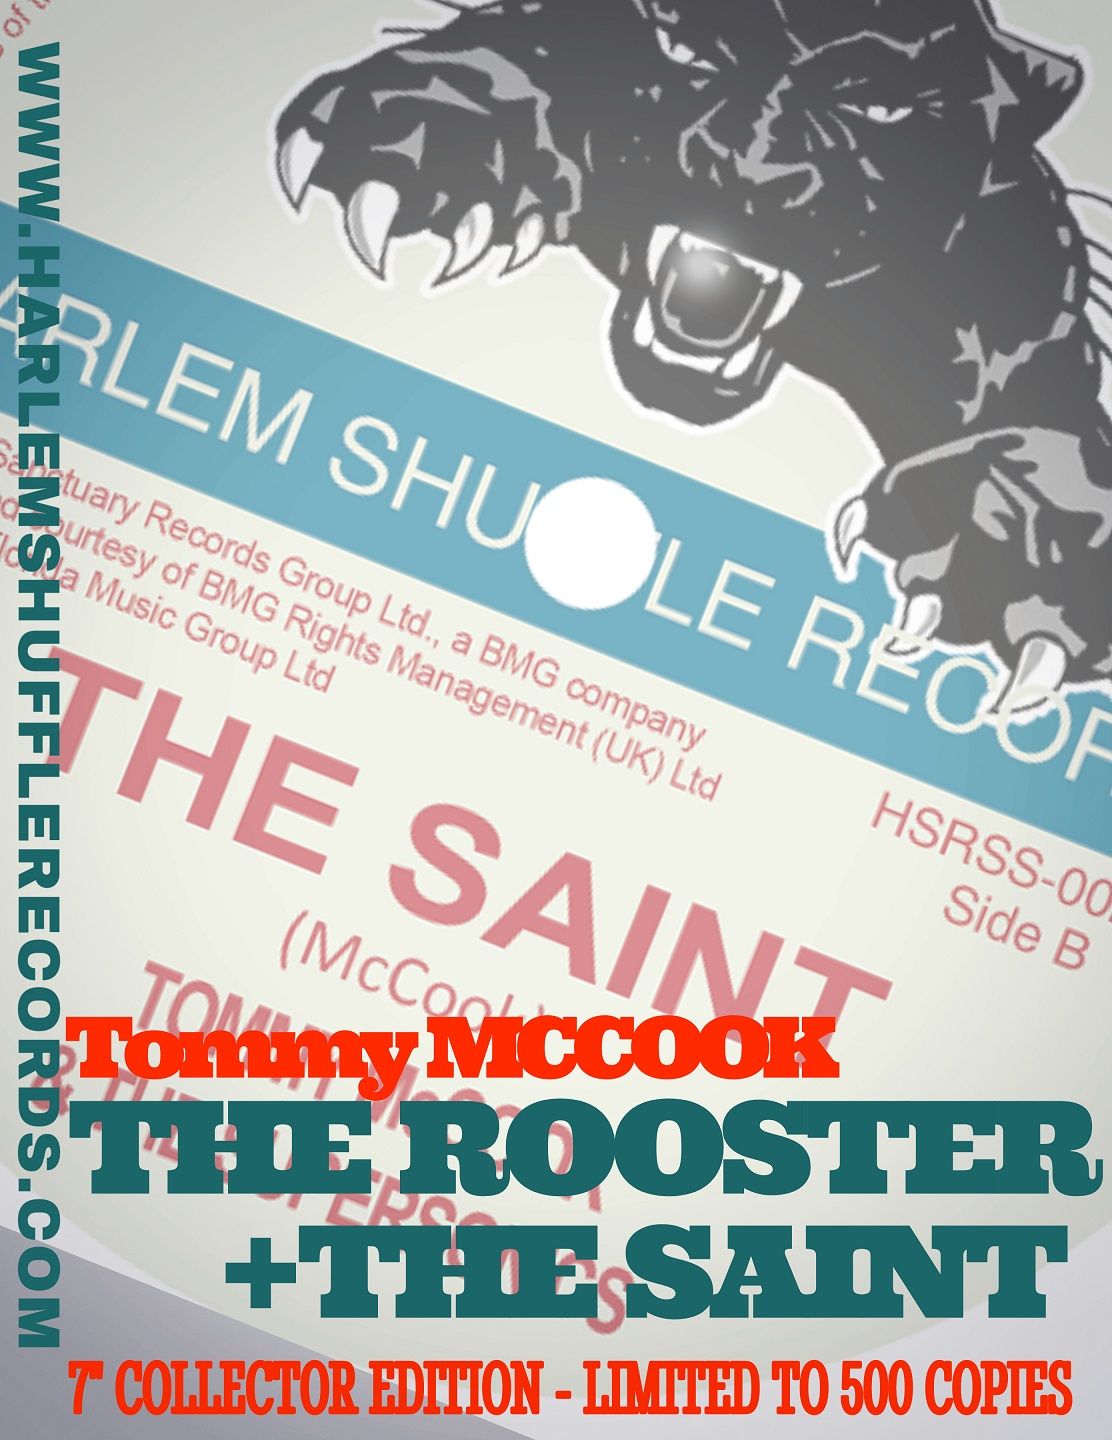 Tommy MCCook - The Rooster - The Saint - 7inch vinyl single - Harlem Shuffle Records